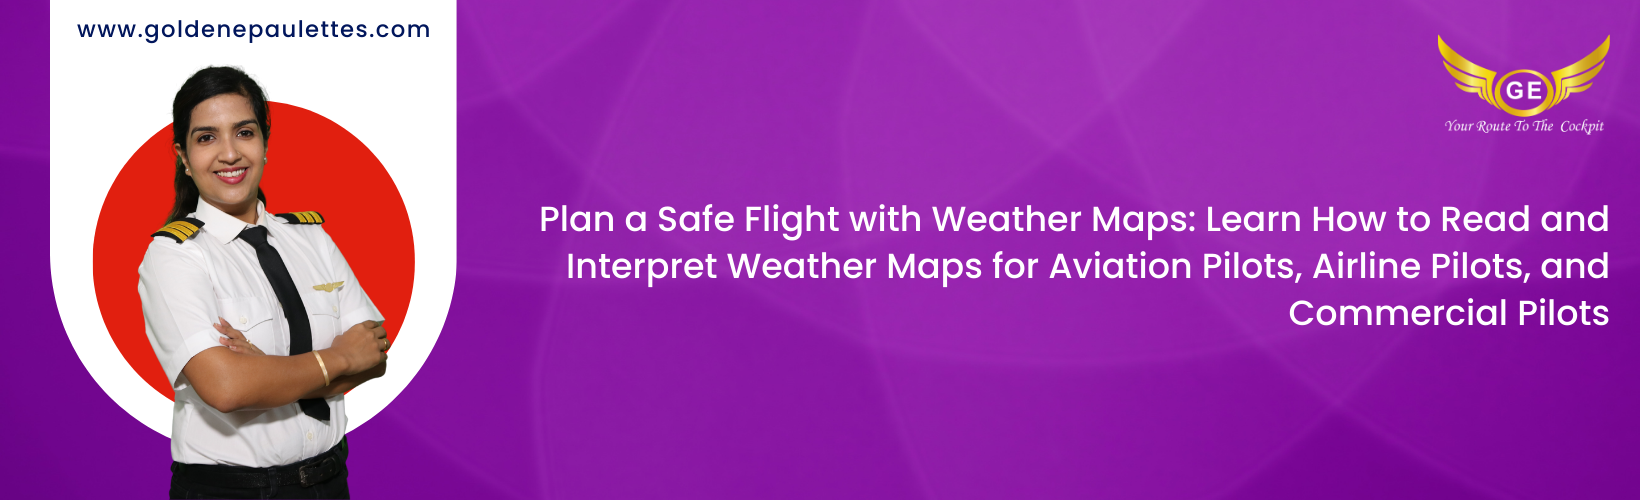 Using Weather Maps to Plan a Flight